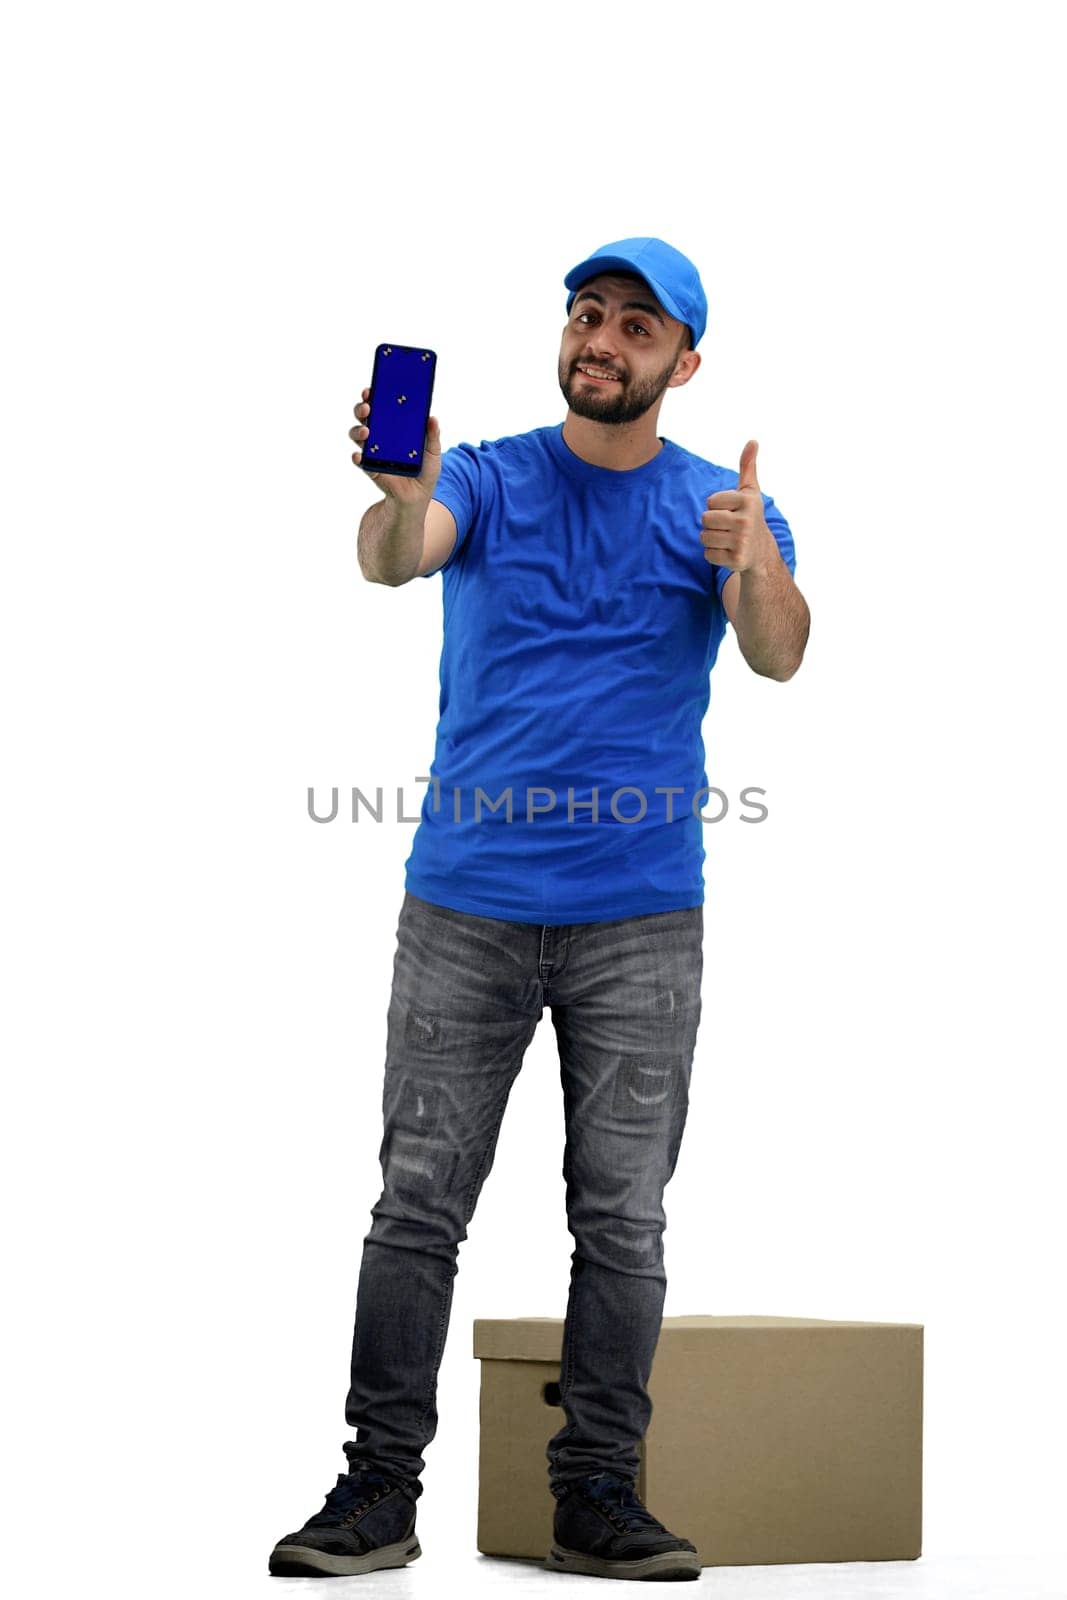 The deliveryman, in full height, on a white background, shows the phone.